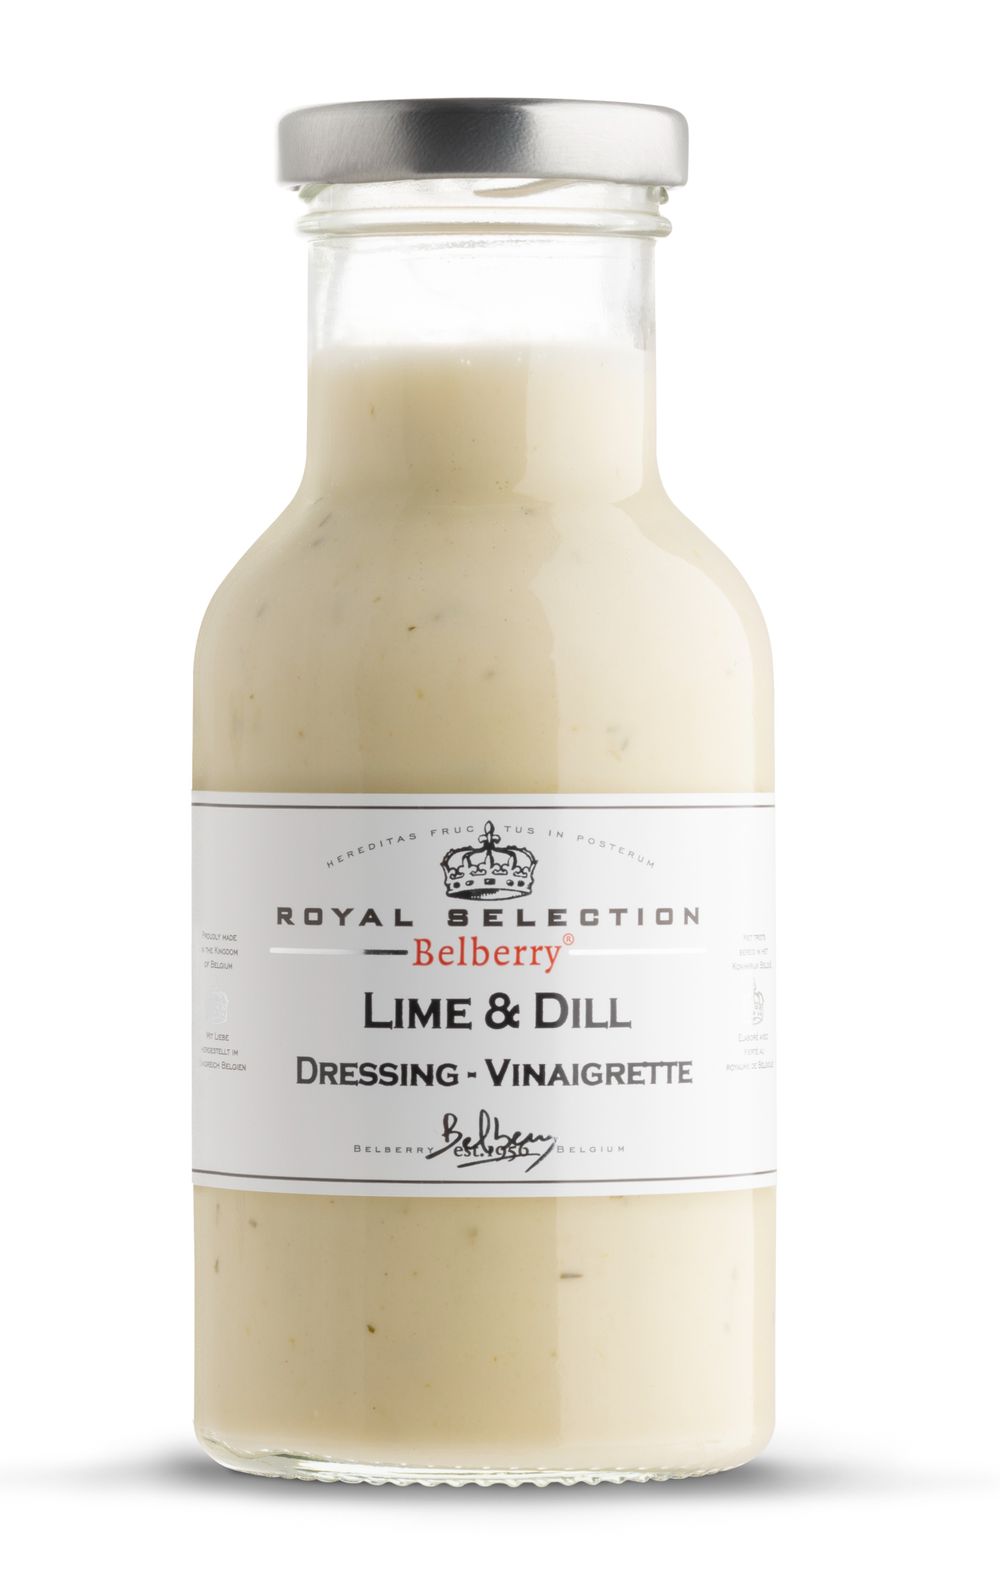 Lime & Dill Dressing